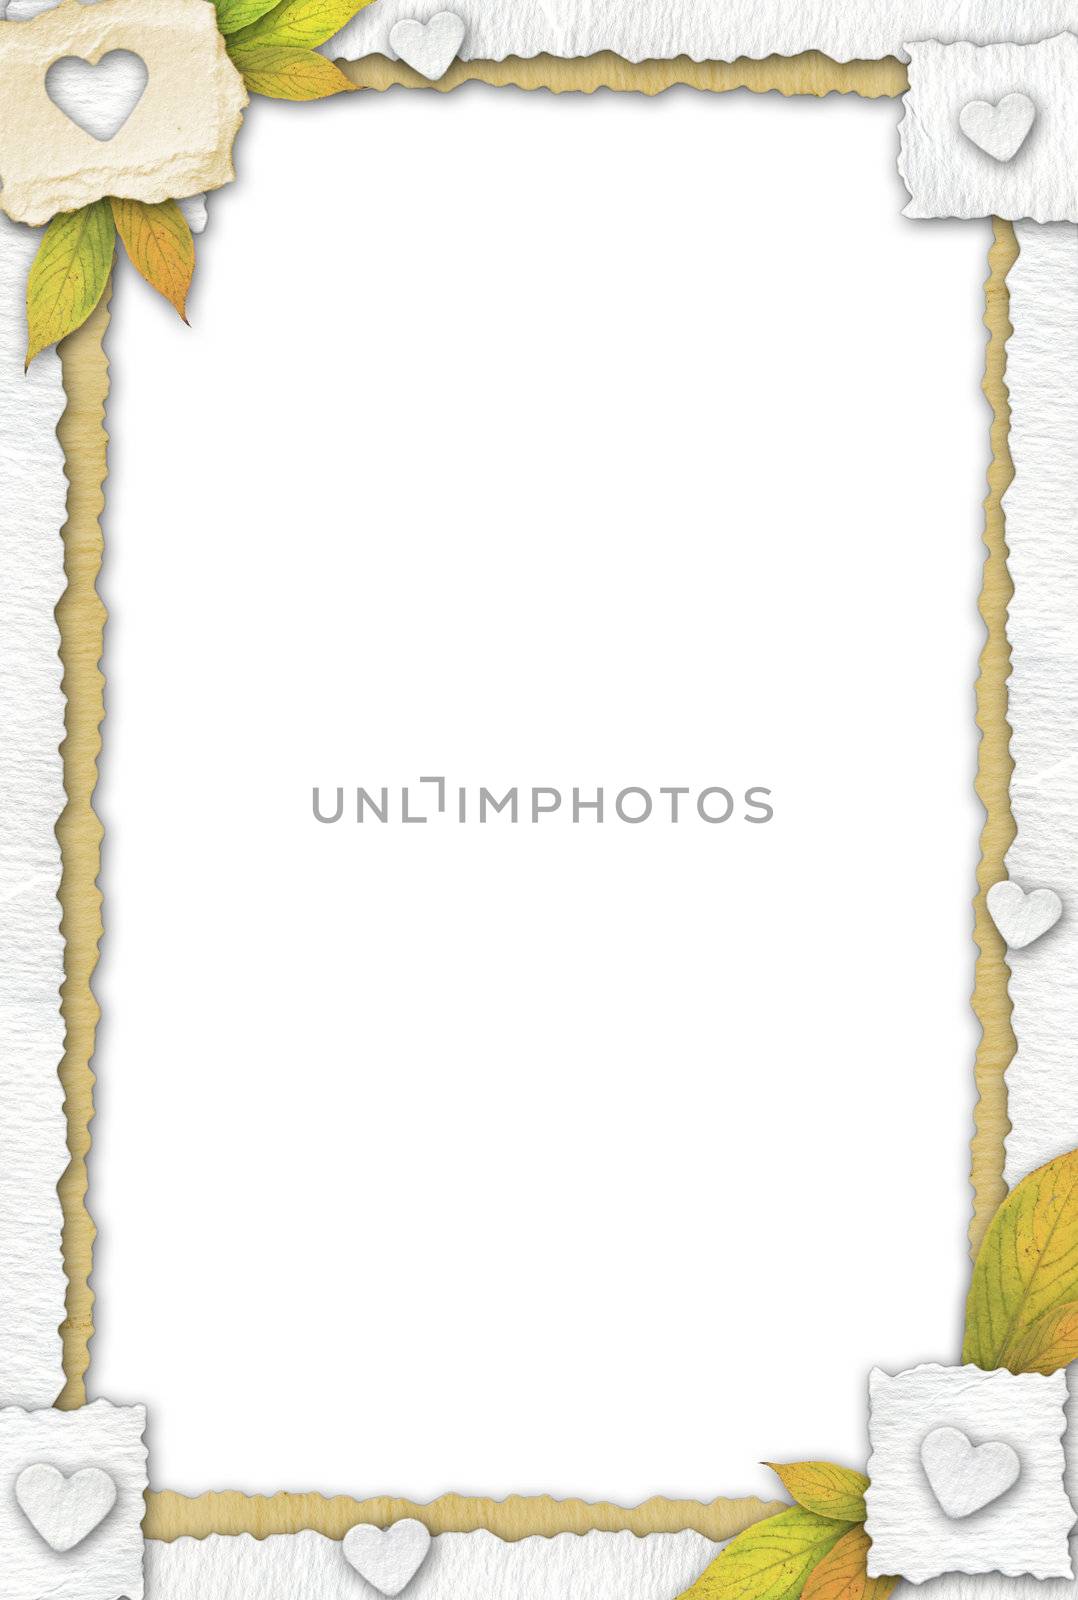 Frame made by several pieces of paper and leaves. All scanned media.
Included a clipping path.